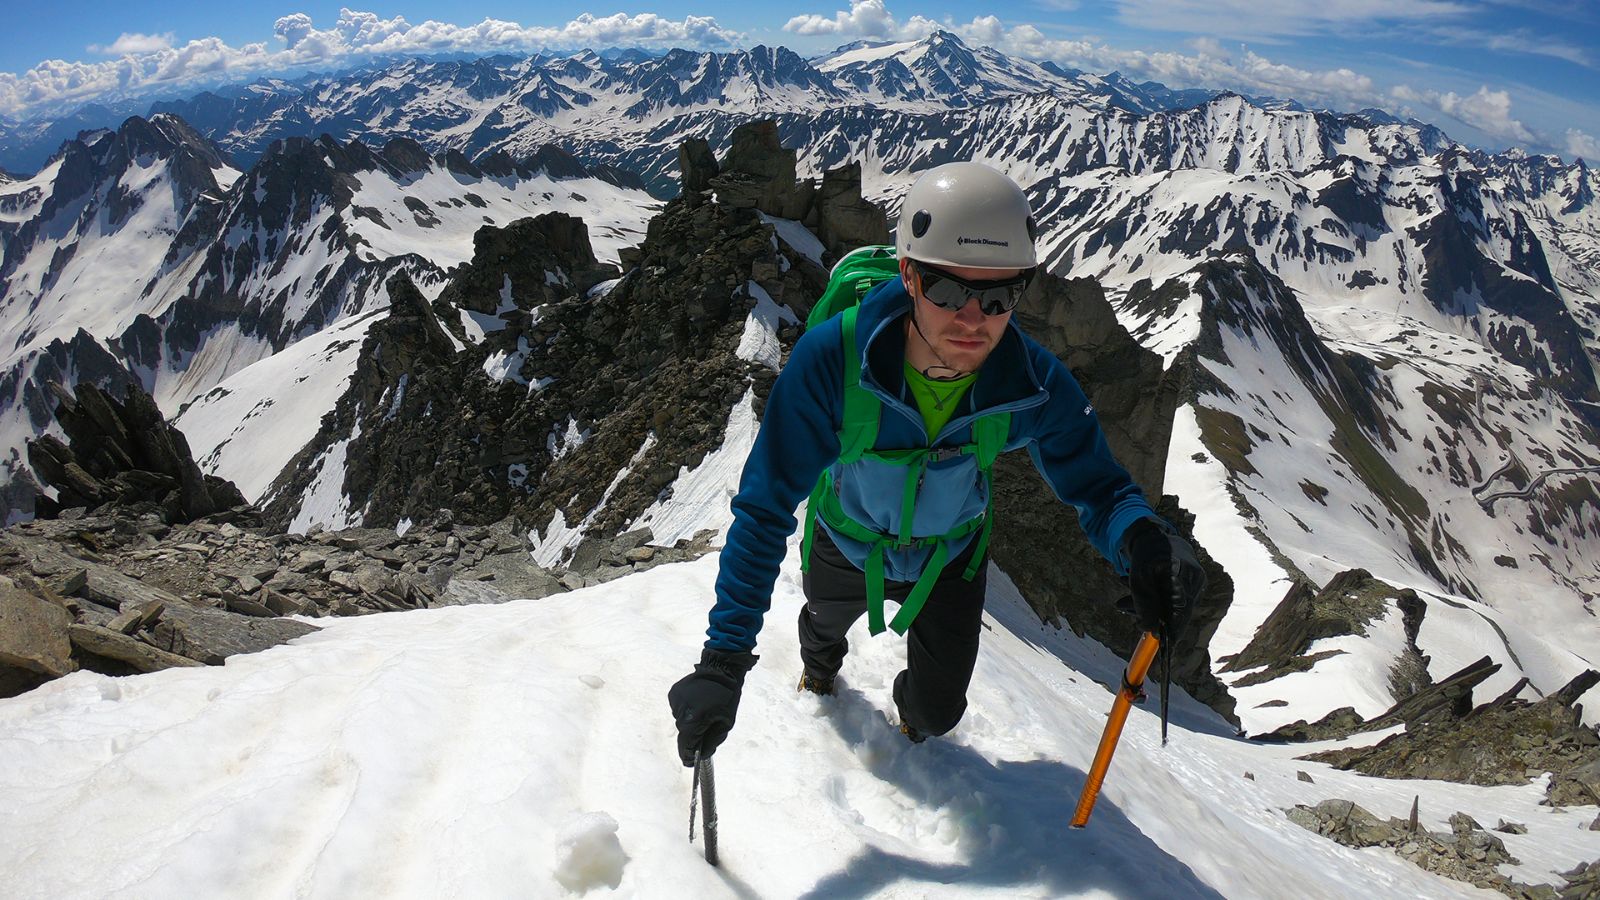 On the Pizzo Nero with ropes, carabiners, ice axes, helmet and gloves. 